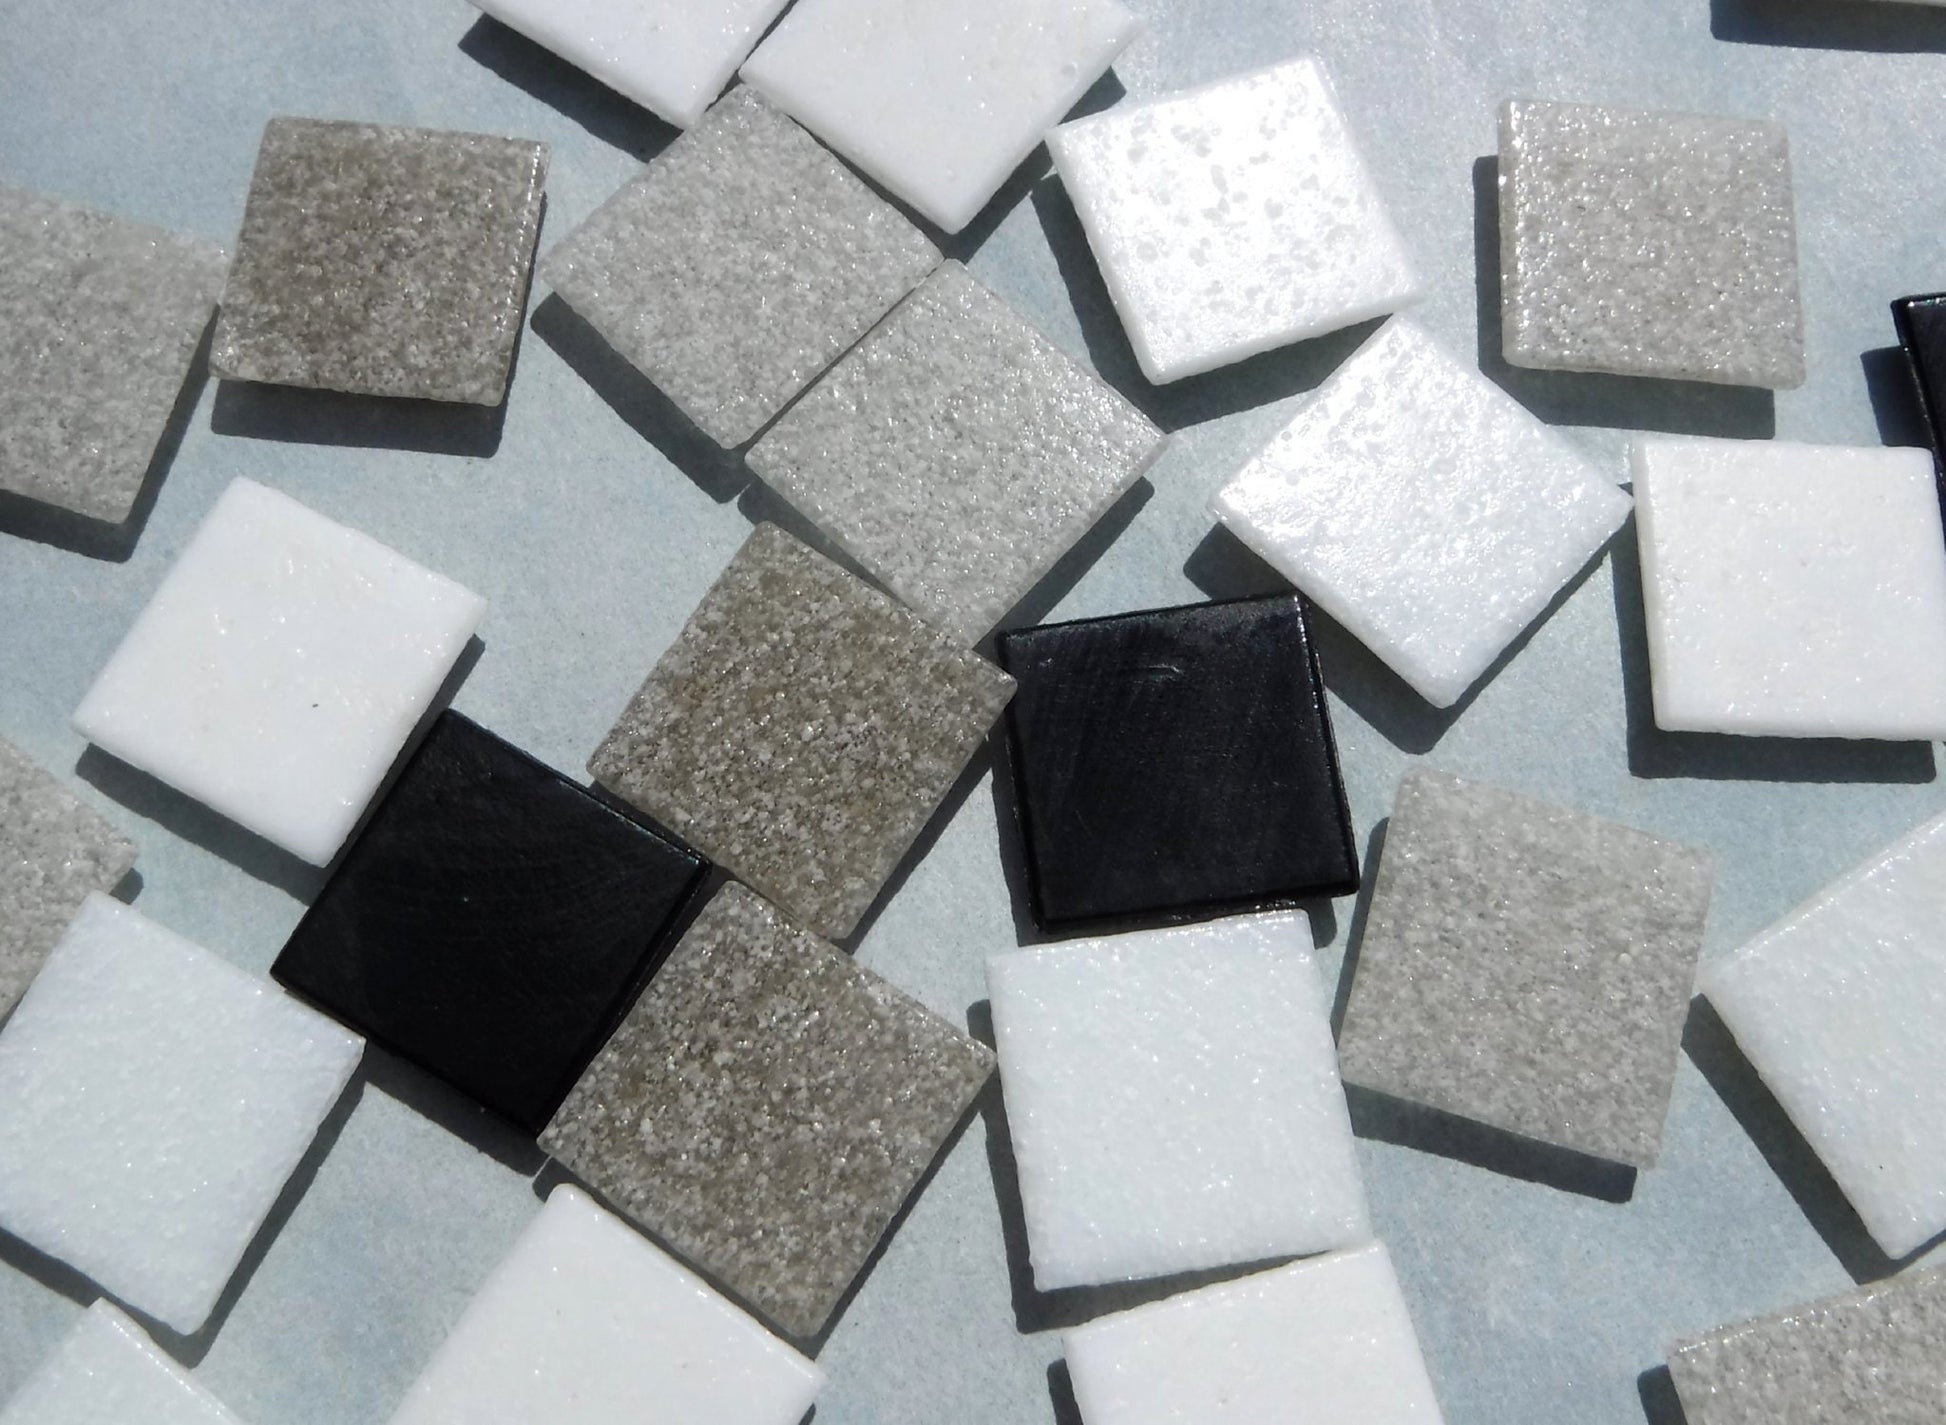 Monochrome Mix Glass Mosaic Tiles Squares - 20mm - Half Pound of Vitreous Glass Tiles in a Mix of White Black and Grays